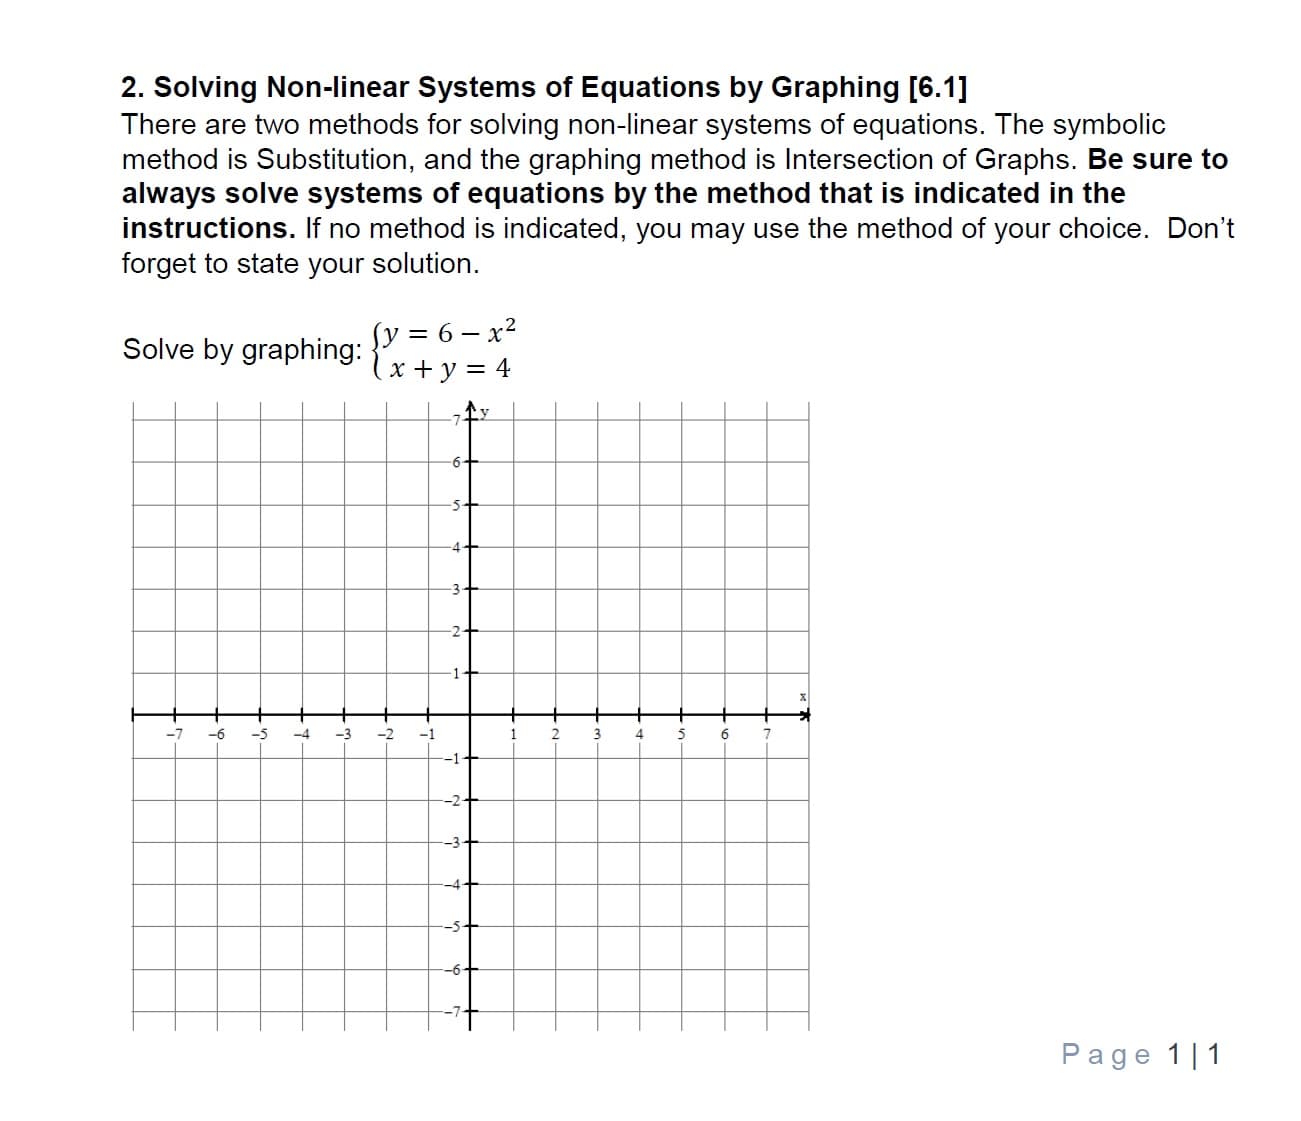 2. Solving Non-linear Systems of Equations by Graphing [6.1]
There are two methods for solving non-linear systems of equations. The symbolic
method is Substitution, and the graphing method is Intersection of Graphs. Be sure to
always solve systems of equations by the method that is indicated in the
instructions. If no method is indicated, you may use the method of your choice. Don't
forget to state your solution.
Solve by graphing:
+ y = 4
7
4
2
-7 -6 5-3 2 1
1 234 5 6 7
Page 111
